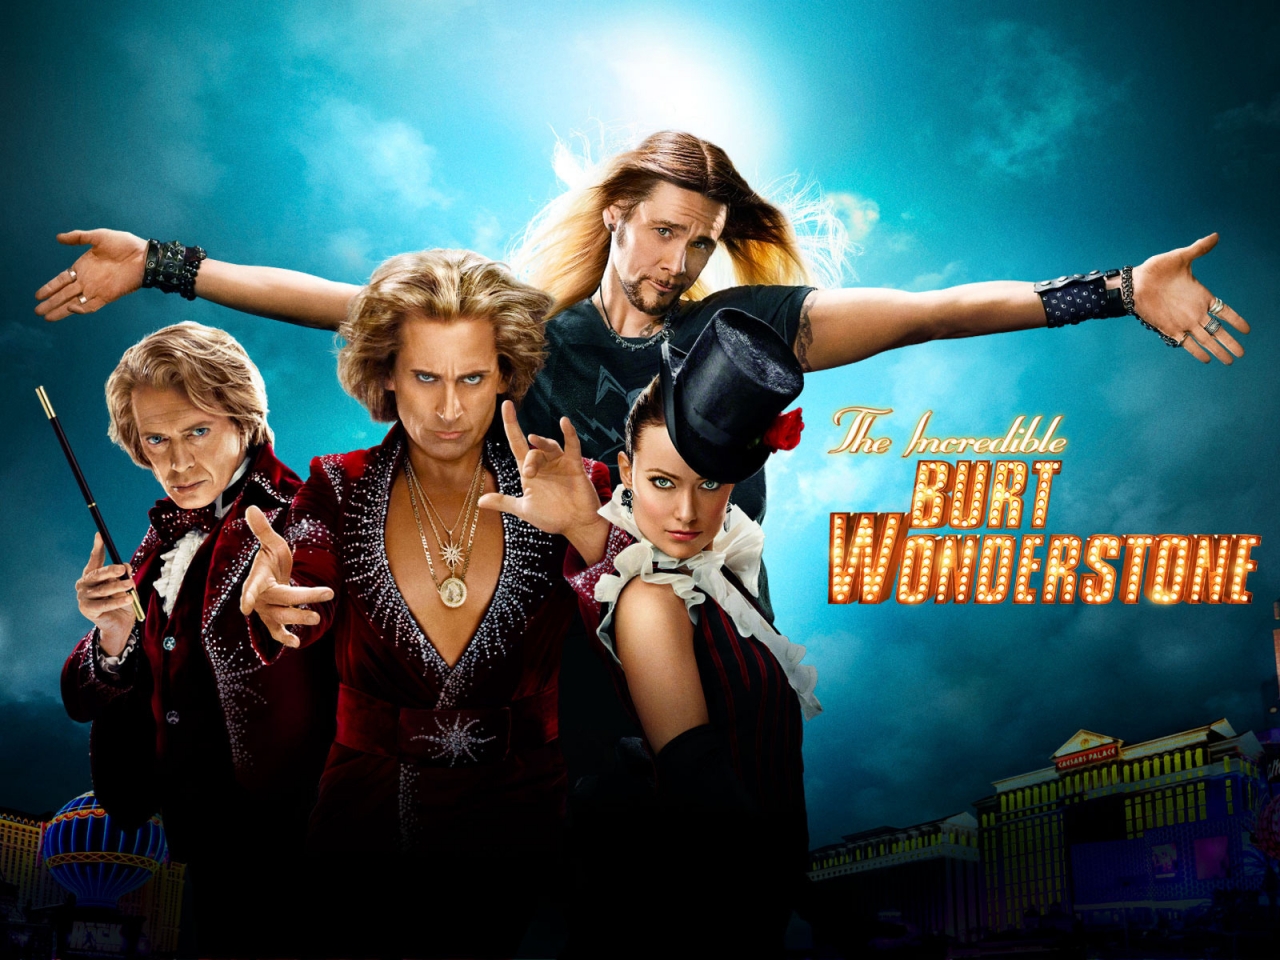 2013 The Incredible Burt Wonderstone Poster for 1280 x 960 resolution